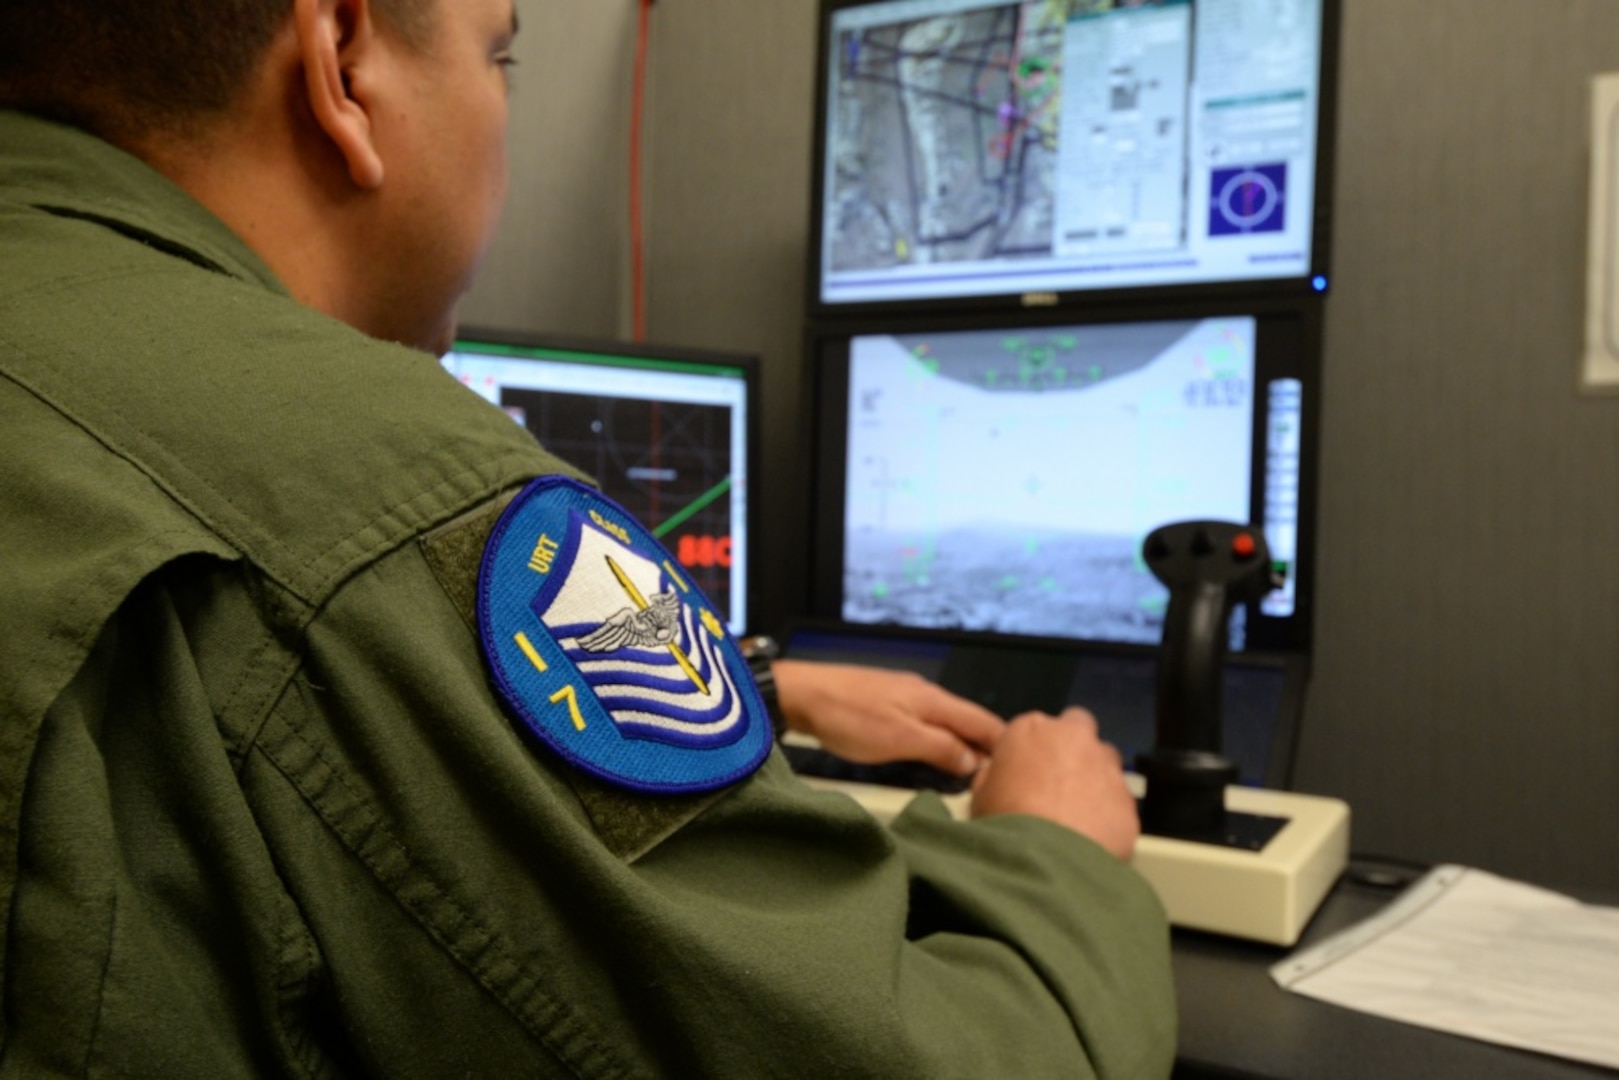 Master Sgt. Alex, one of the first Enlisted Pilot Initial Class students, operated the controls for a simulator during the Remotely Piloted Aircraft Fundamentals Course at Joint Base San Antonio-Randolph, Texas, April 19, 2017. Alex is assigned to Undergraduate Remotely Piloted Training Class 17-10, 558th Flying Training Squadron. (U.S. Air Force photo by Tech. Sgt. Ave I. Young) The Undergraduate Remotely Piloted Training Class 17-10 patch is worn by all the students and was designed with the master sergeant insignia to represent the Enlisted Pilot Initial Class students. Master Sgt. Alex, one of the first Enlisted Pilot Initial Class students, operated the controls for a simulator during the Remotely Piloted Aircraft Fundamentals Course at Joint Base San Antonio-Randolph, Texas, April 19, 2017. 